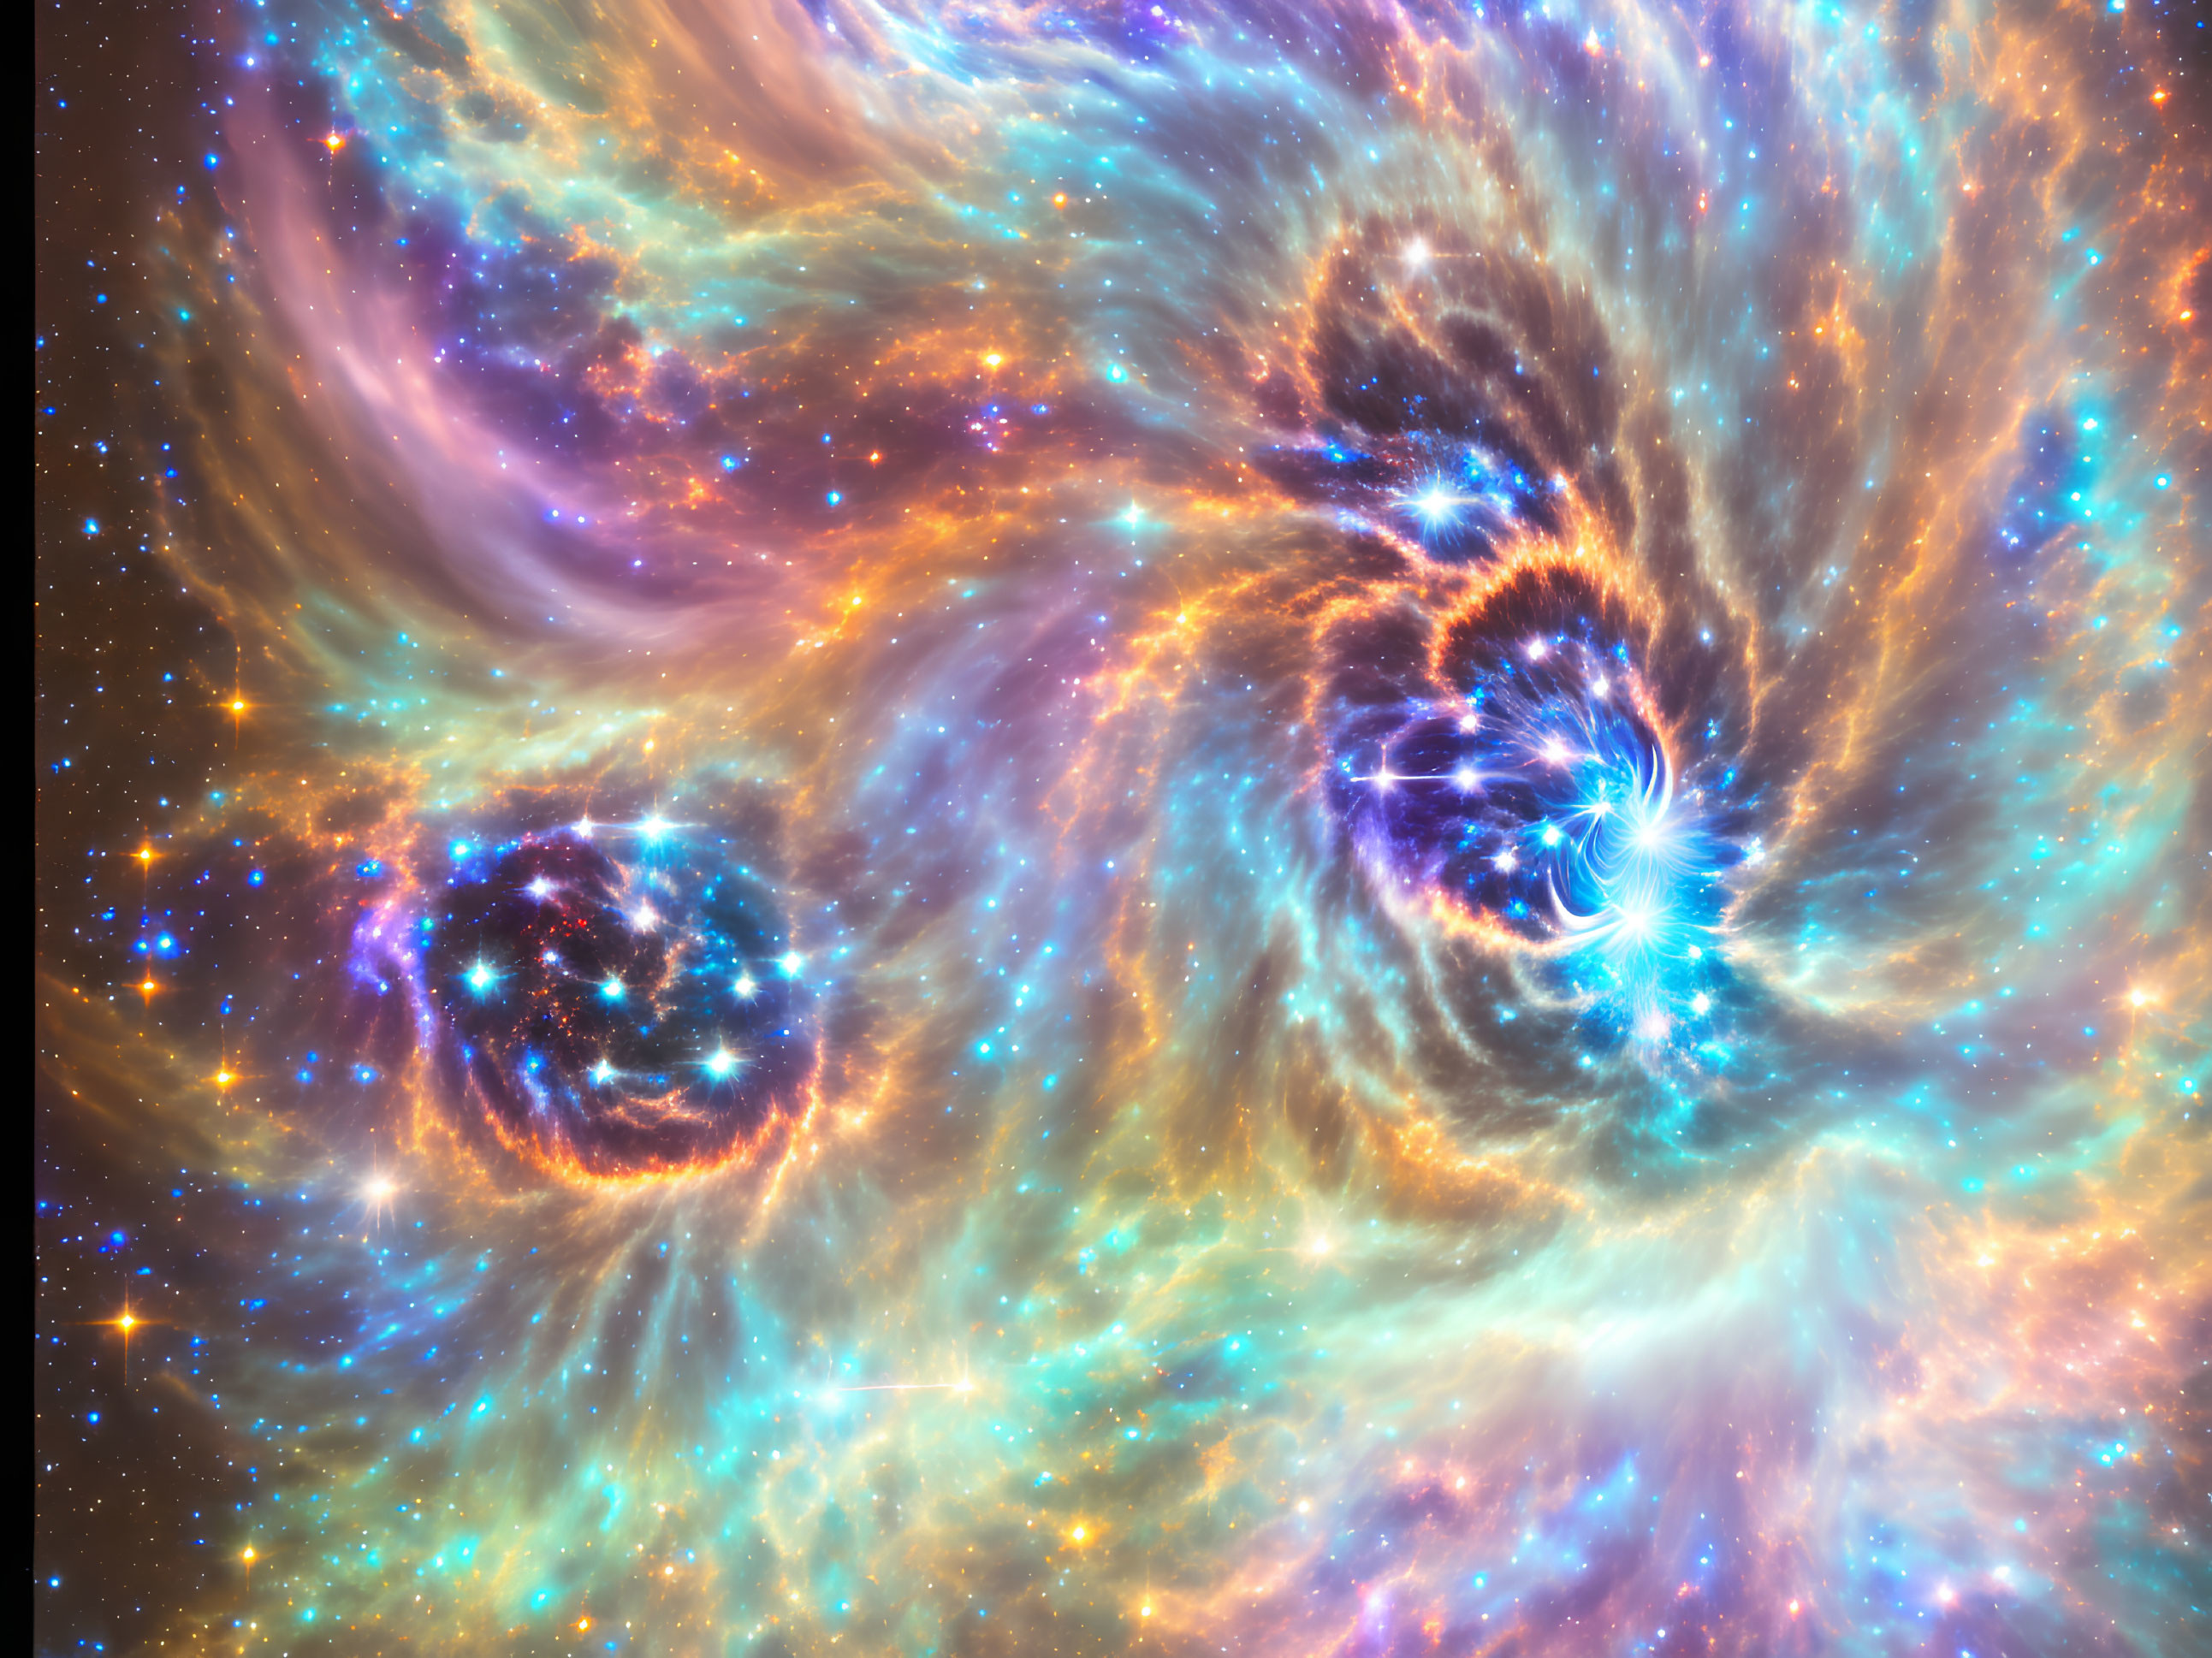 Colorful Space Nebula with Swirling Blues, Oranges, and Yellows